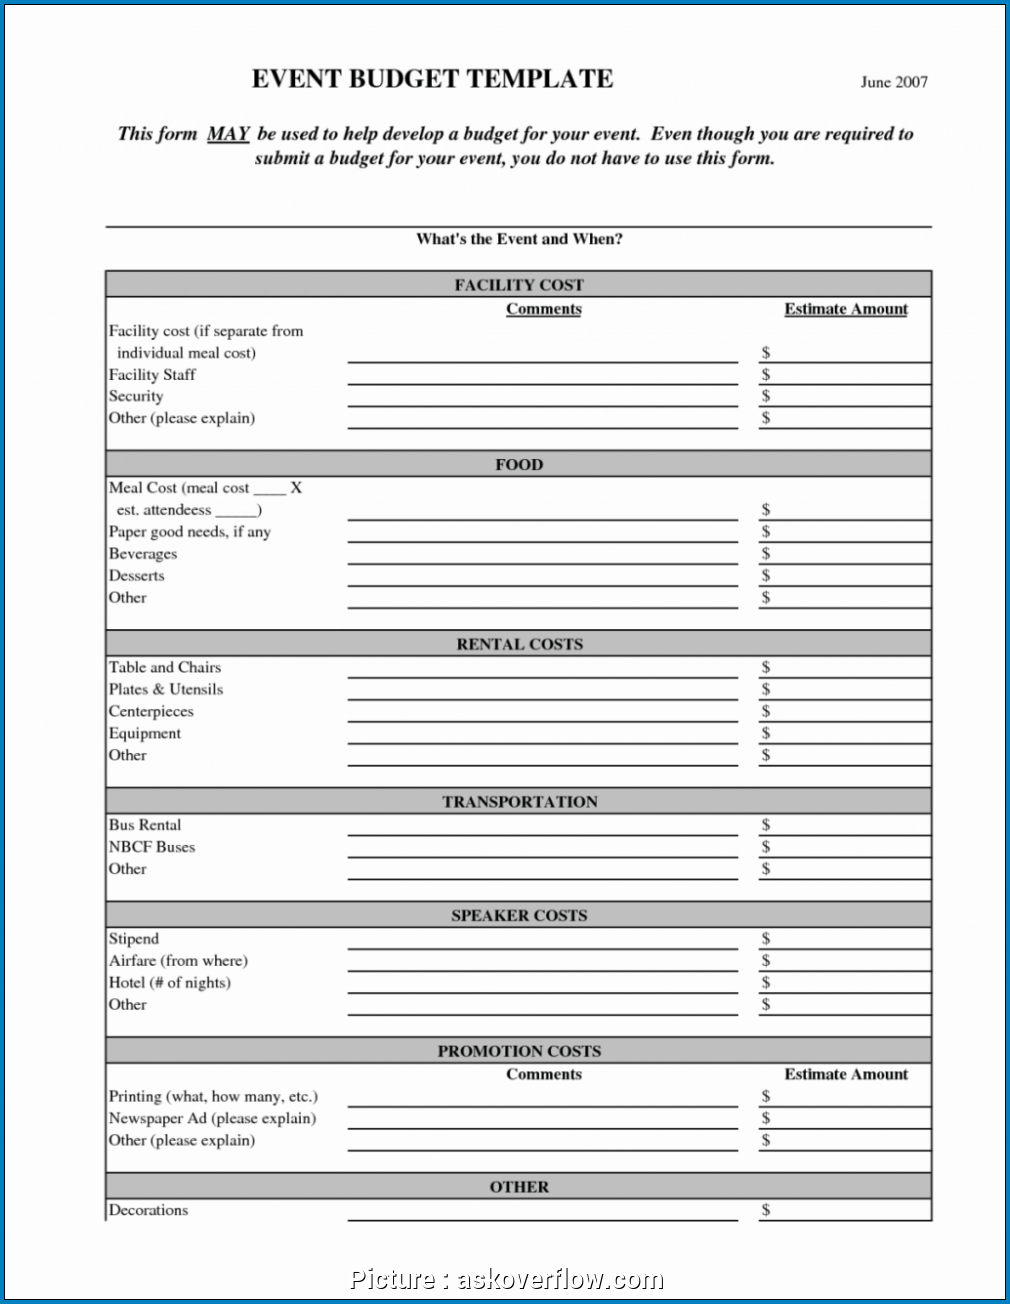 Example of Corporate Event Planning Checklist Template